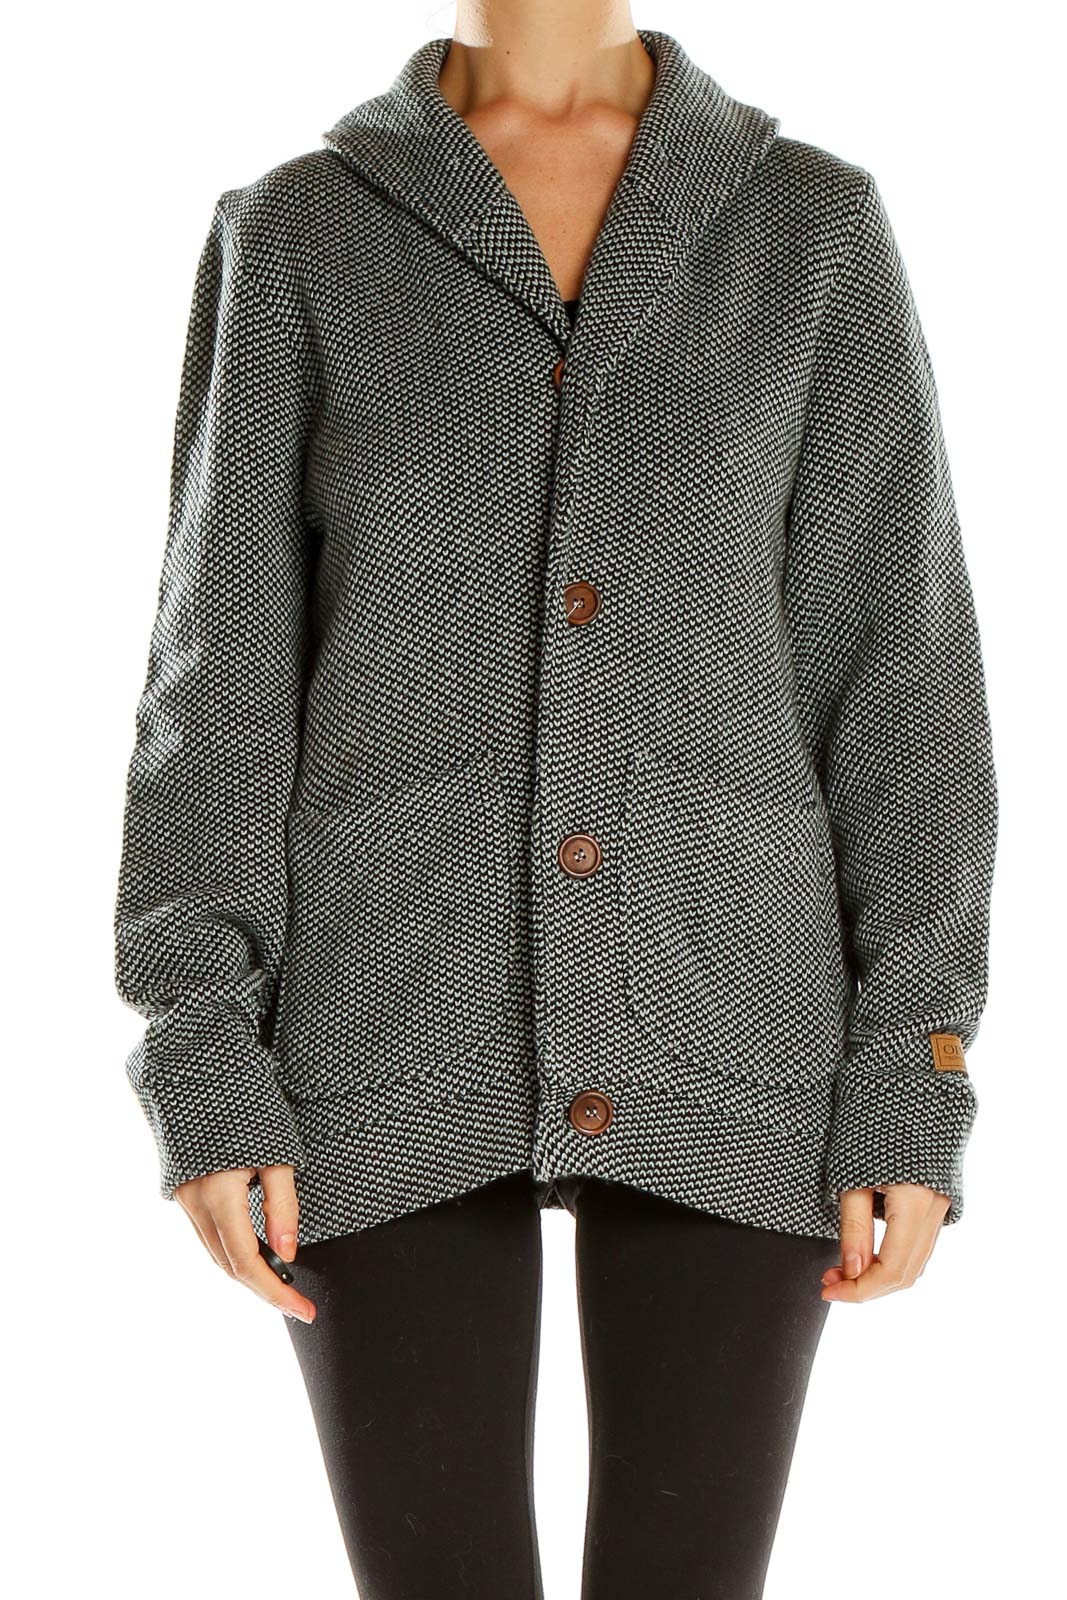 Gray Textured Cardigan Sweater Front